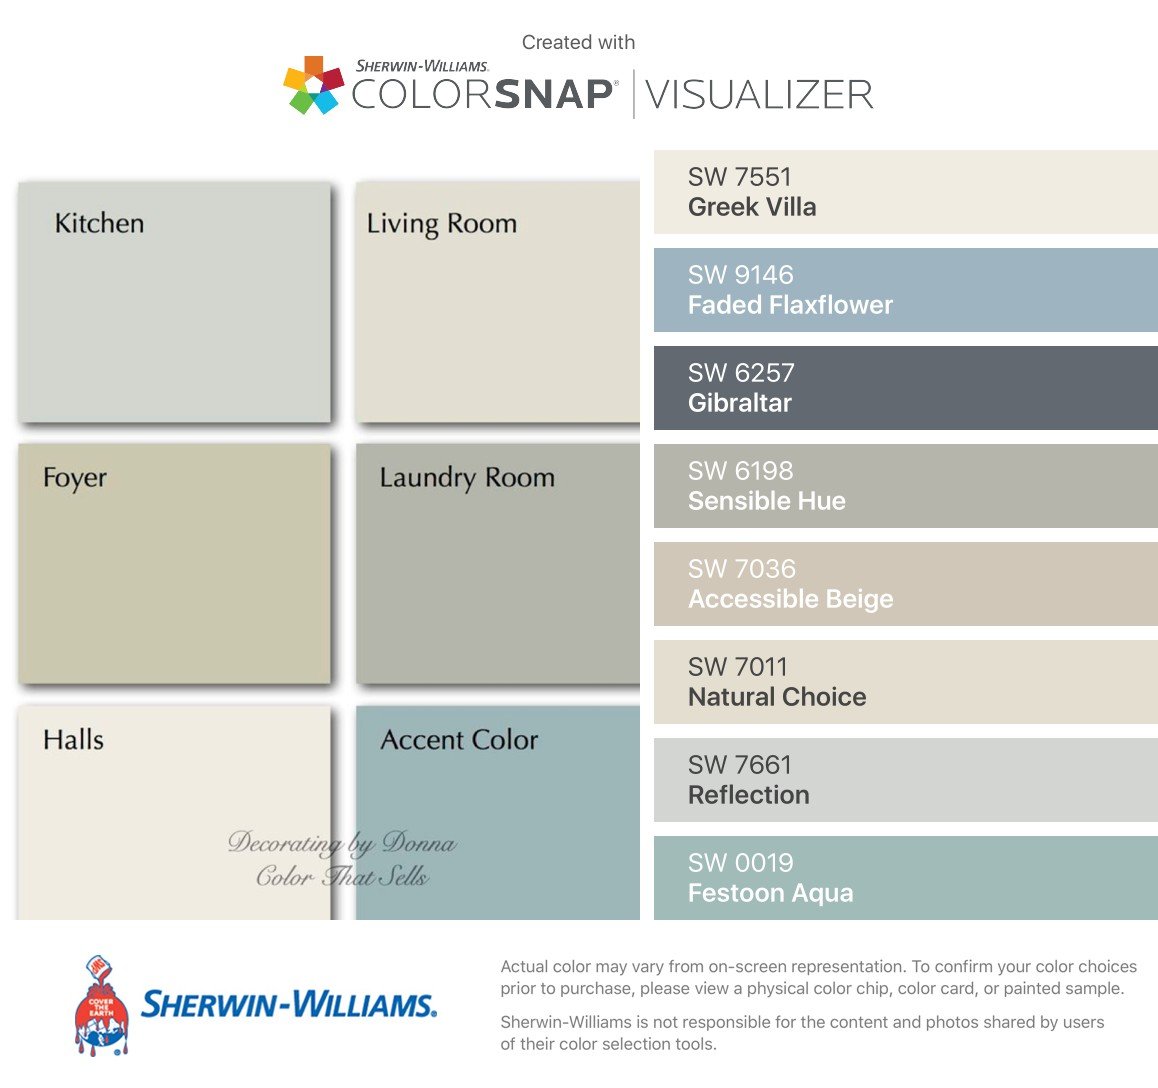 SW Color Snap Visualizer Colors that Coordinate with Greek Villa